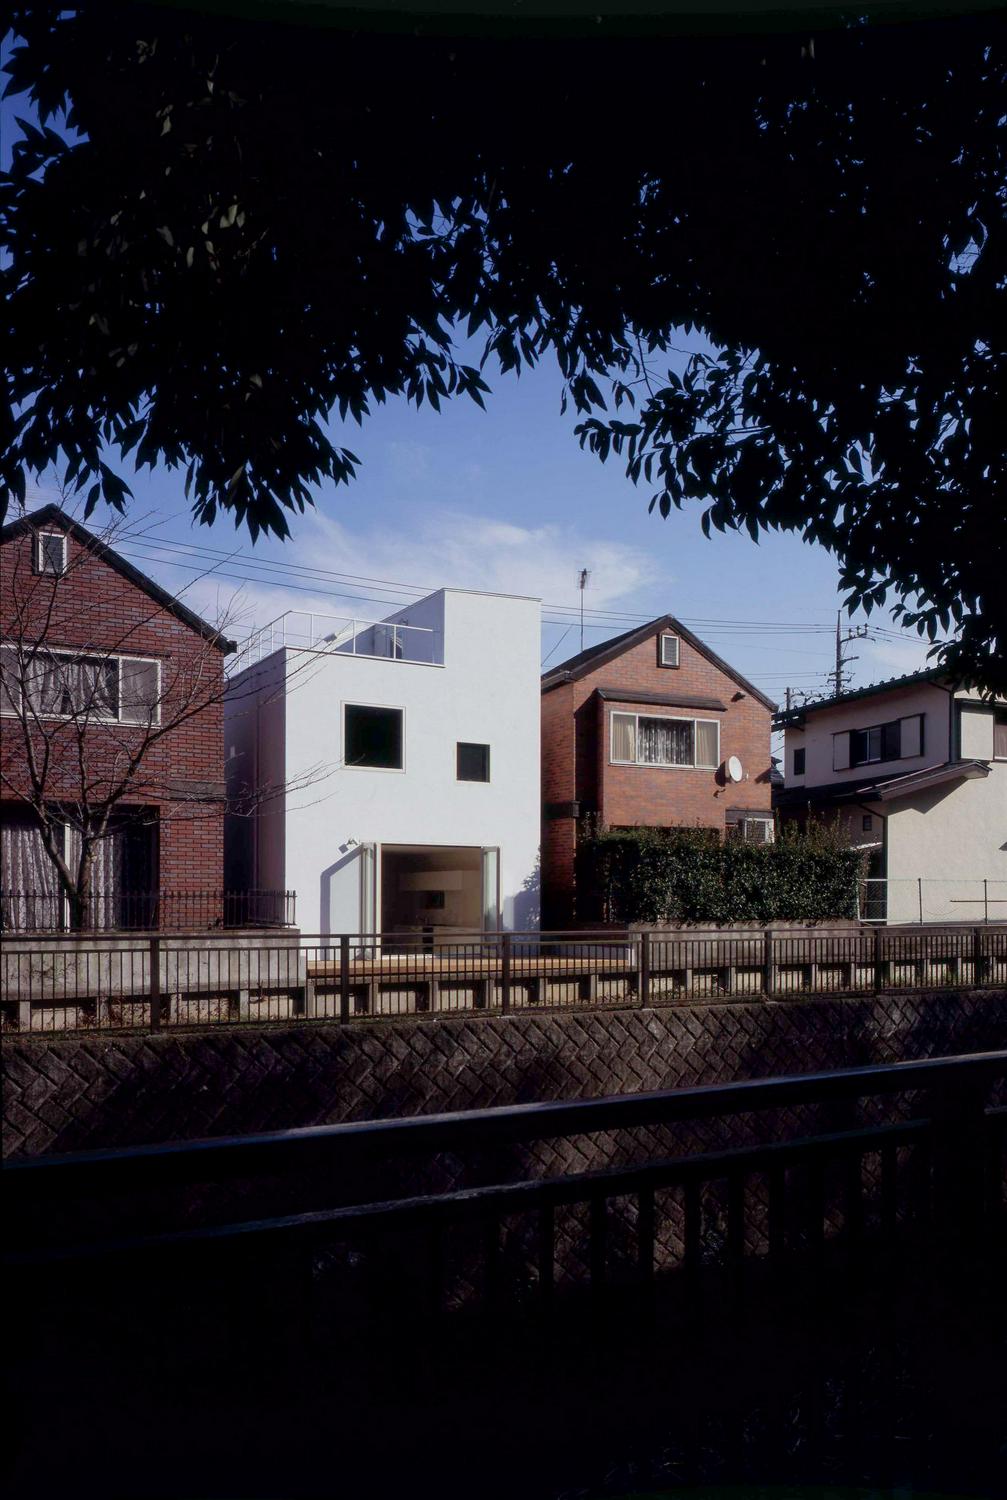 Image of "祖師谷の住宅　〜仙川と暮らす〜", the work by architect : Manabu Naya (image number 1)